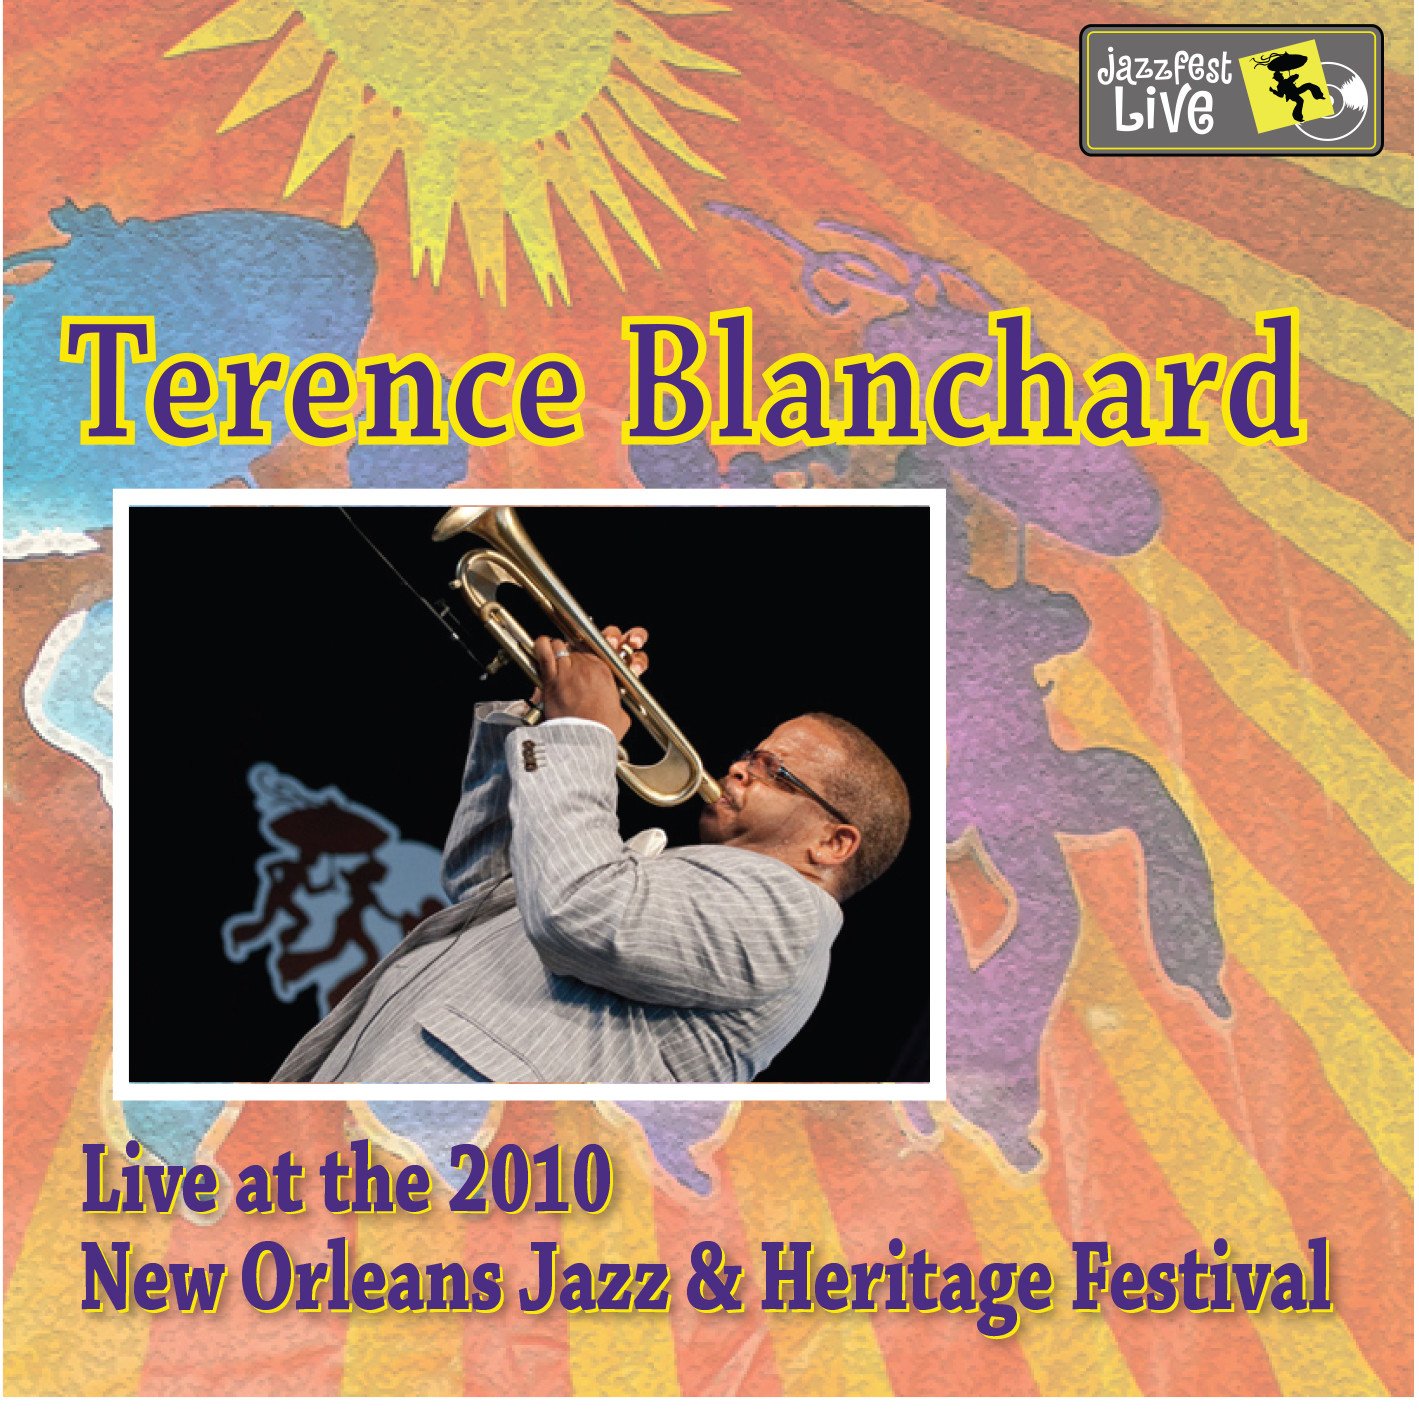 TERENCE BLANCHARD - Live at 2010 New Orleans Jazz & Heritage Festival cover 